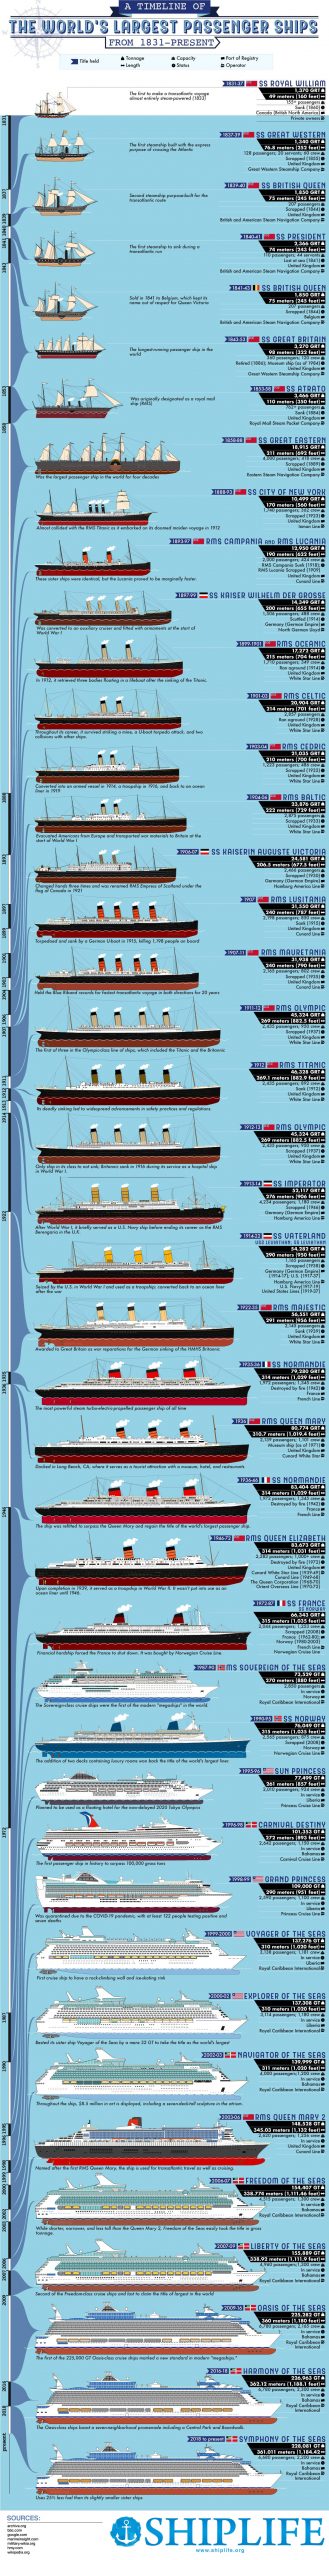 A timeline of the world's largest passenger ships